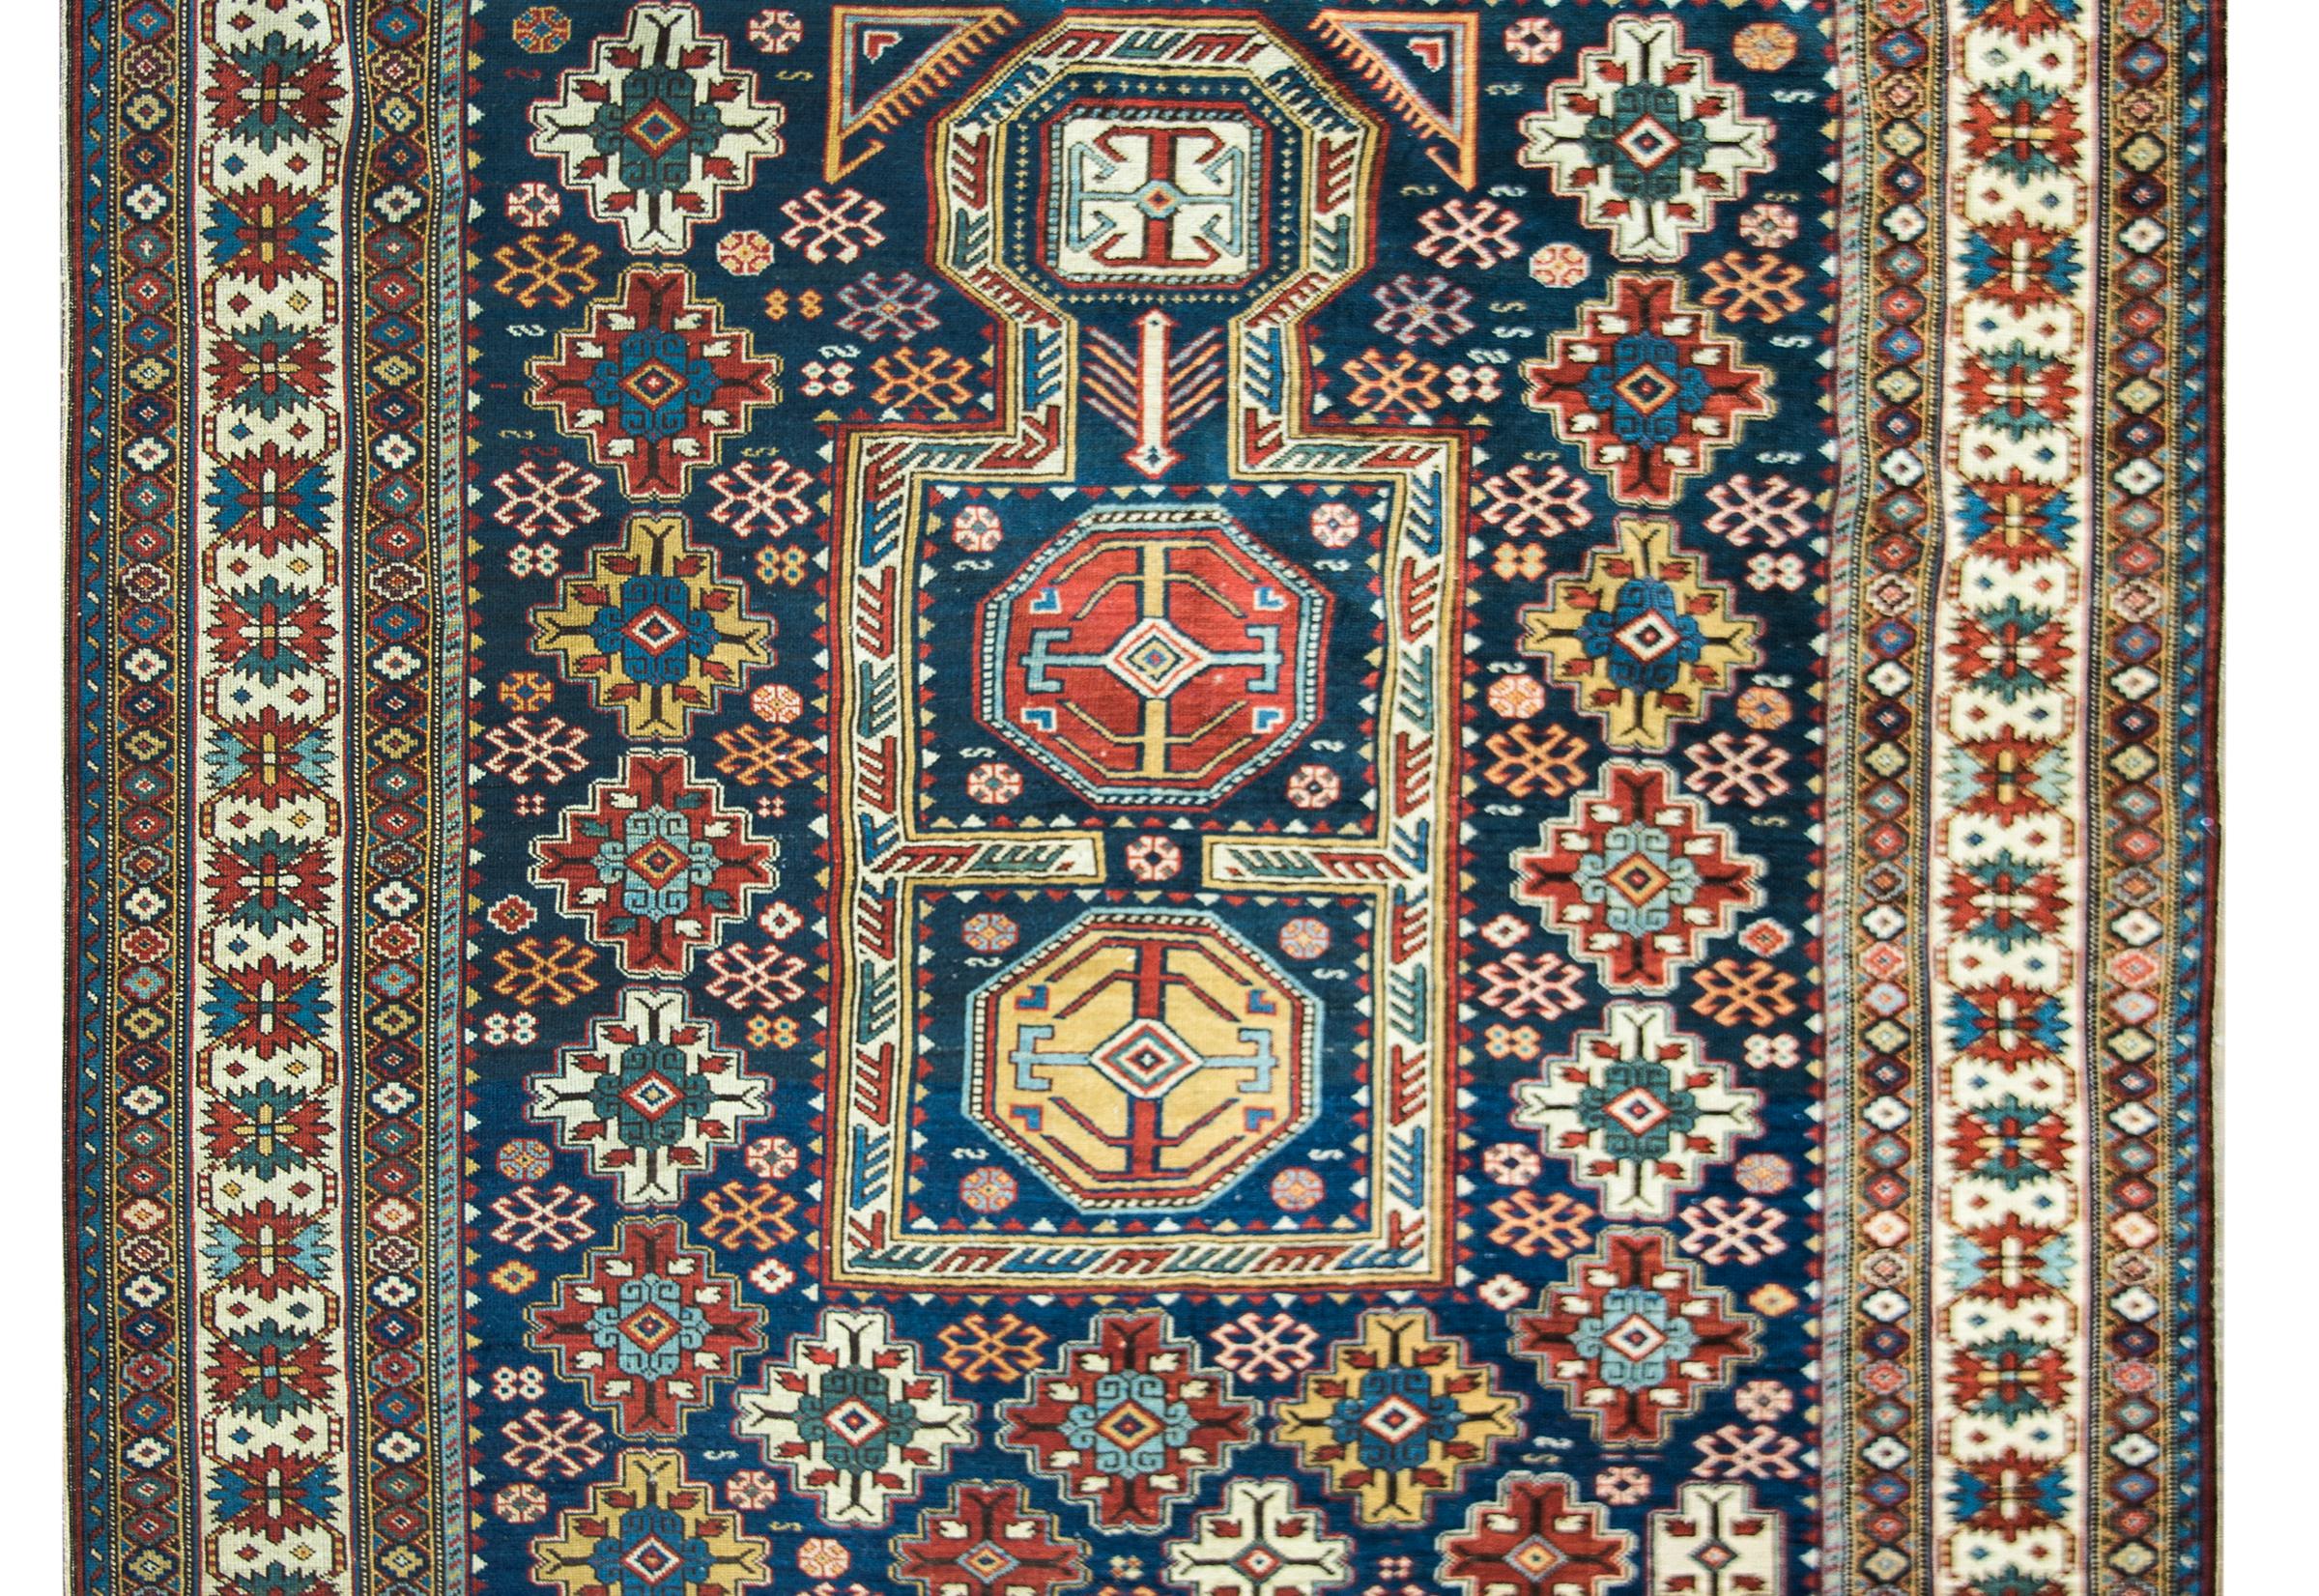 A striking and memorable late 19th century Persian Shirvan rug with the most wonderful field with repeated stylized flowers surrounding a central medallion with more stylized flowers. The border is incredible with multiple thin and wide stripes with